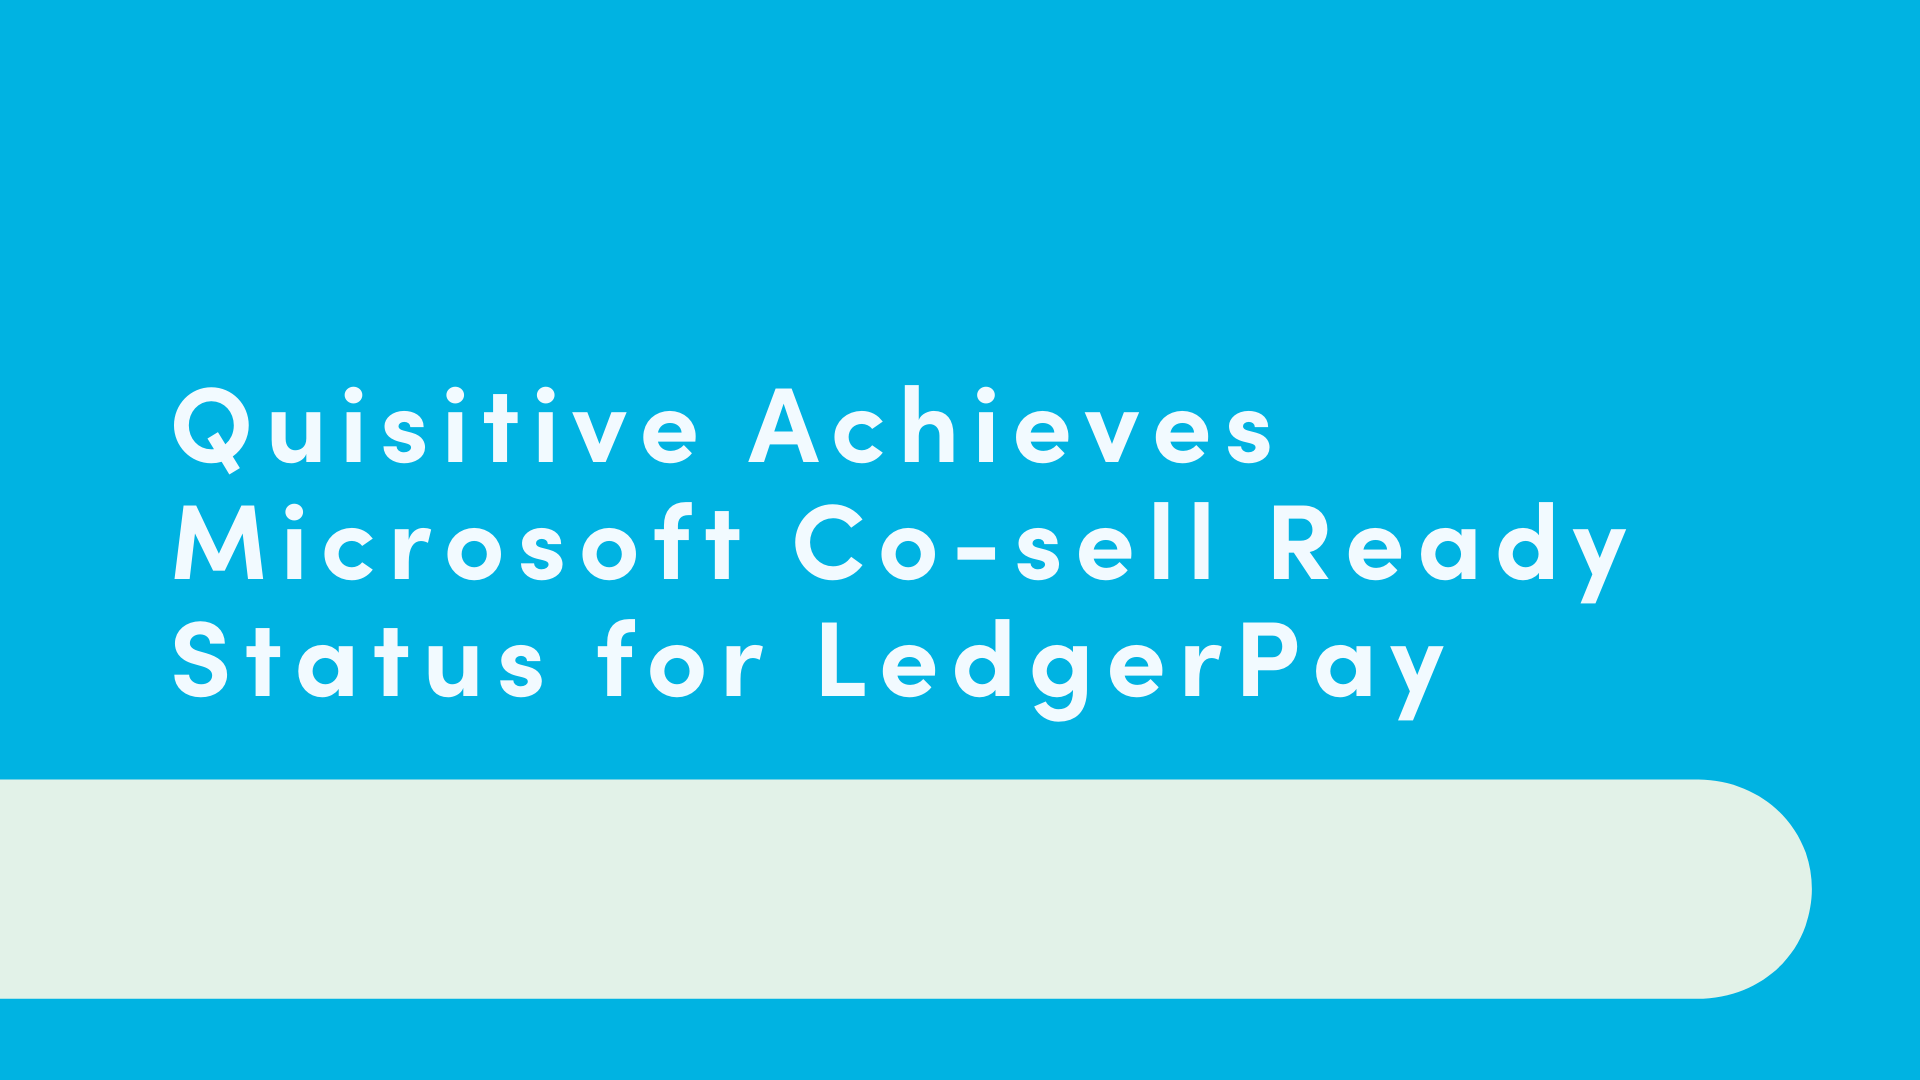 Blue and green background reads "Quisitive Achieves Microsoft Co-sell Ready Status for LedgerPay"